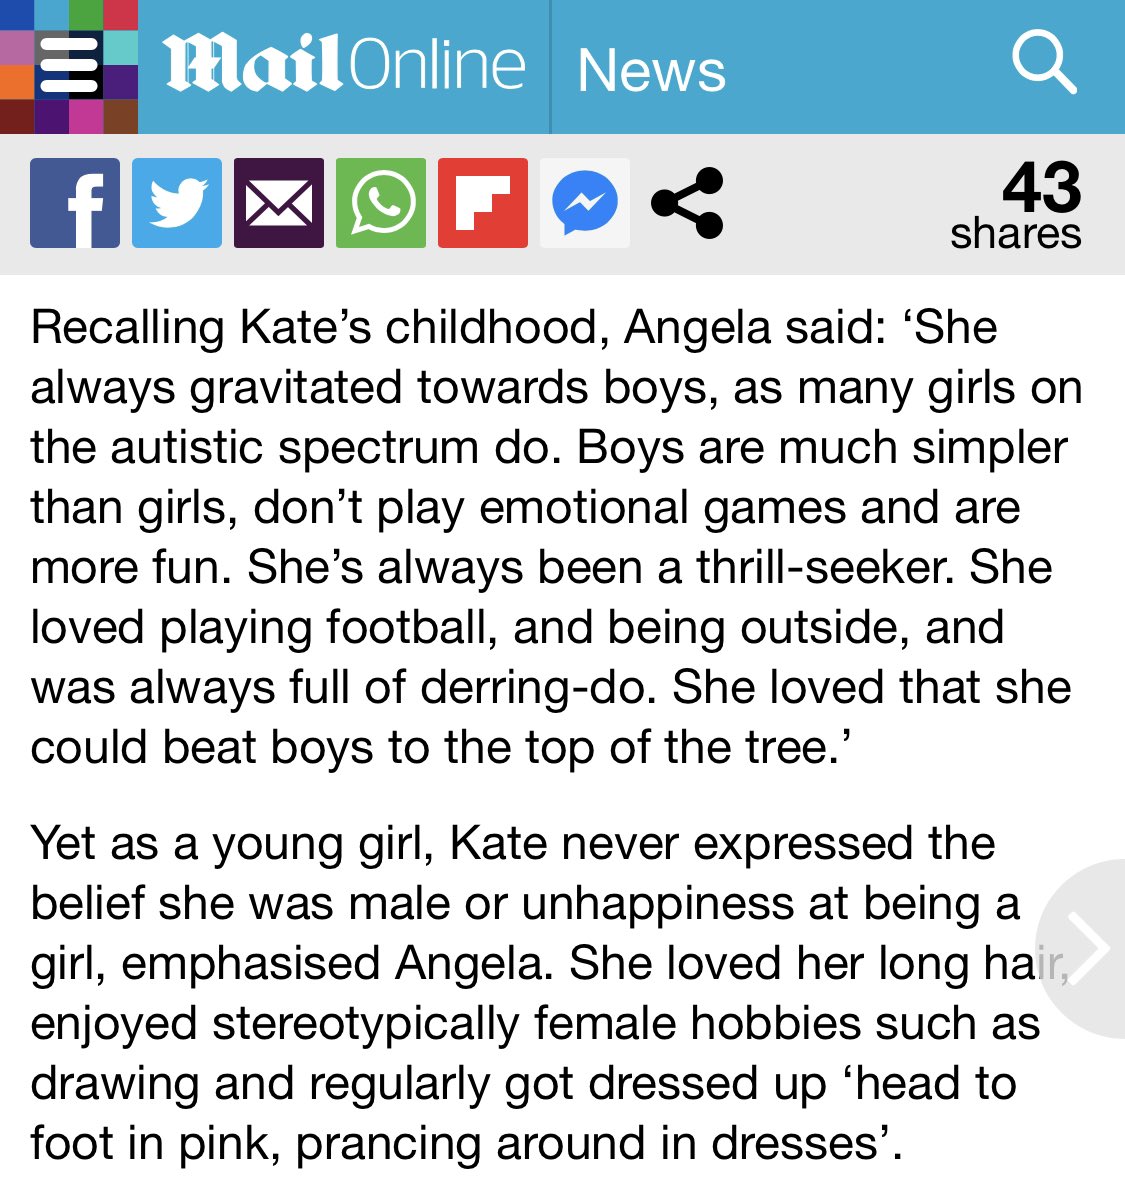 ‘Angela’ then spouts a whole load of sexist stereotypes...On the one hand her “daughter” played with “boyish things” as a child but then turned to “stereotypically female” things as they got older.Surely she knows that gender expression is separate from gender identity?